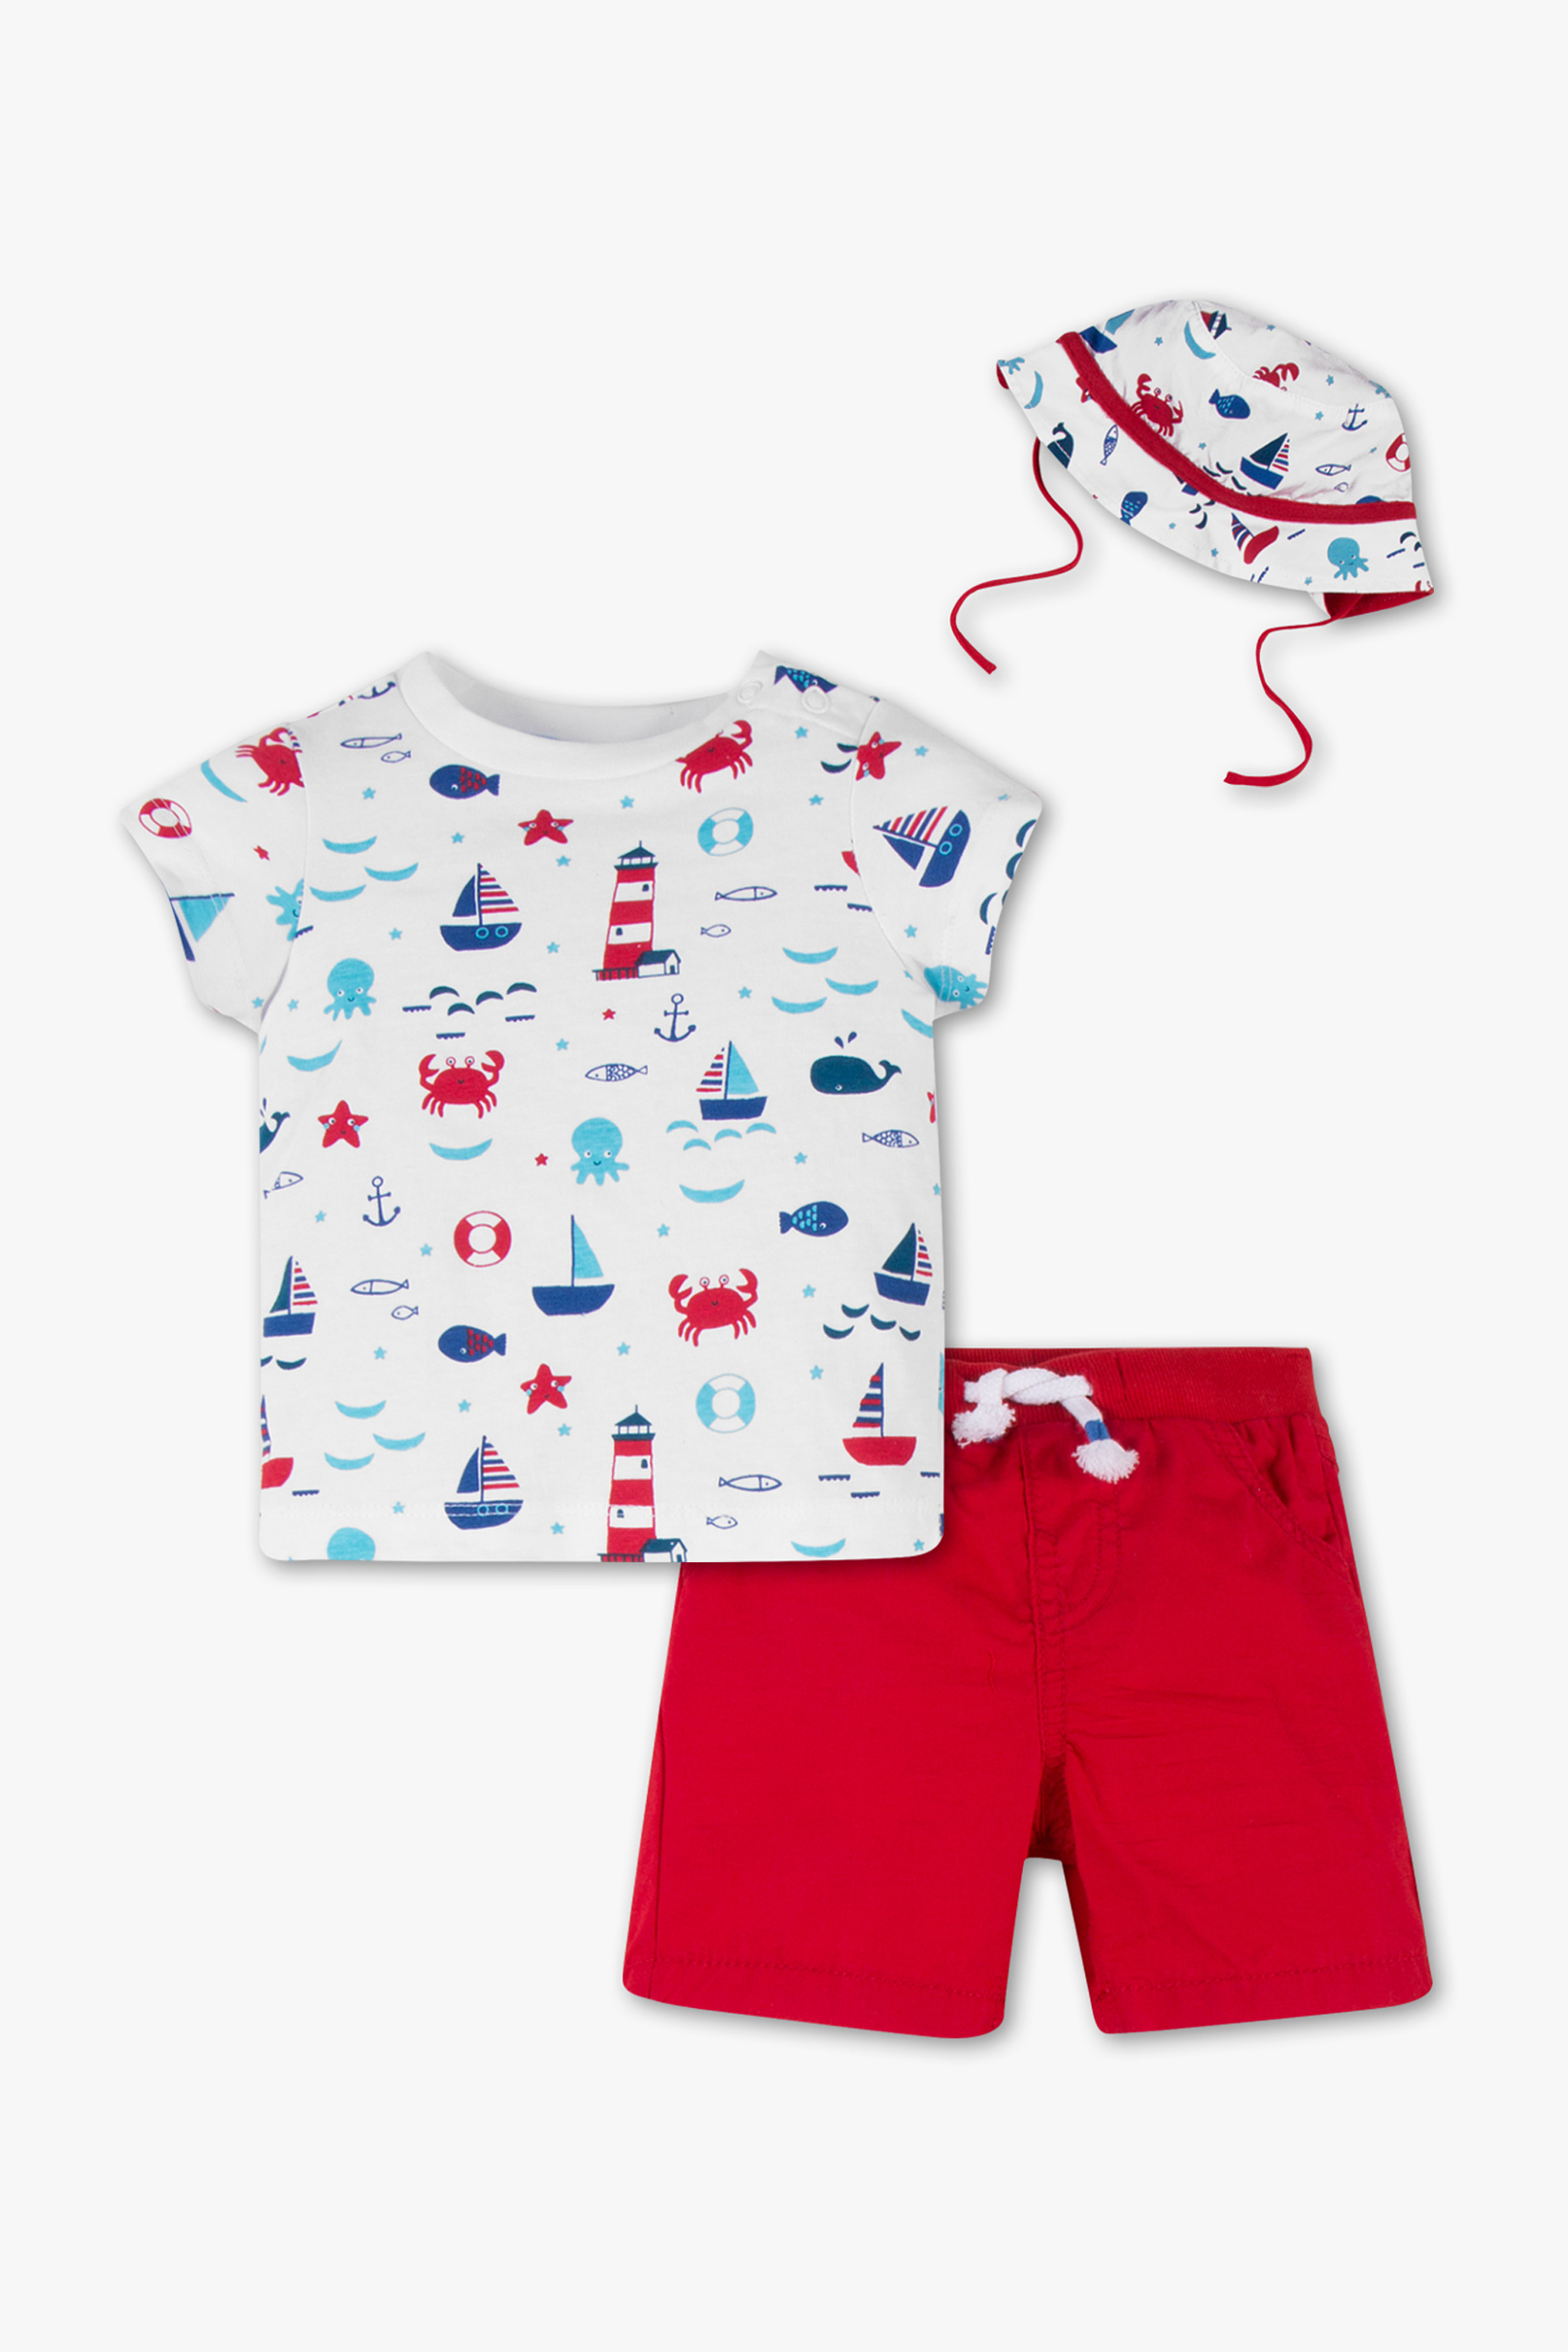 Baby Club Baby-outfit 3-delig